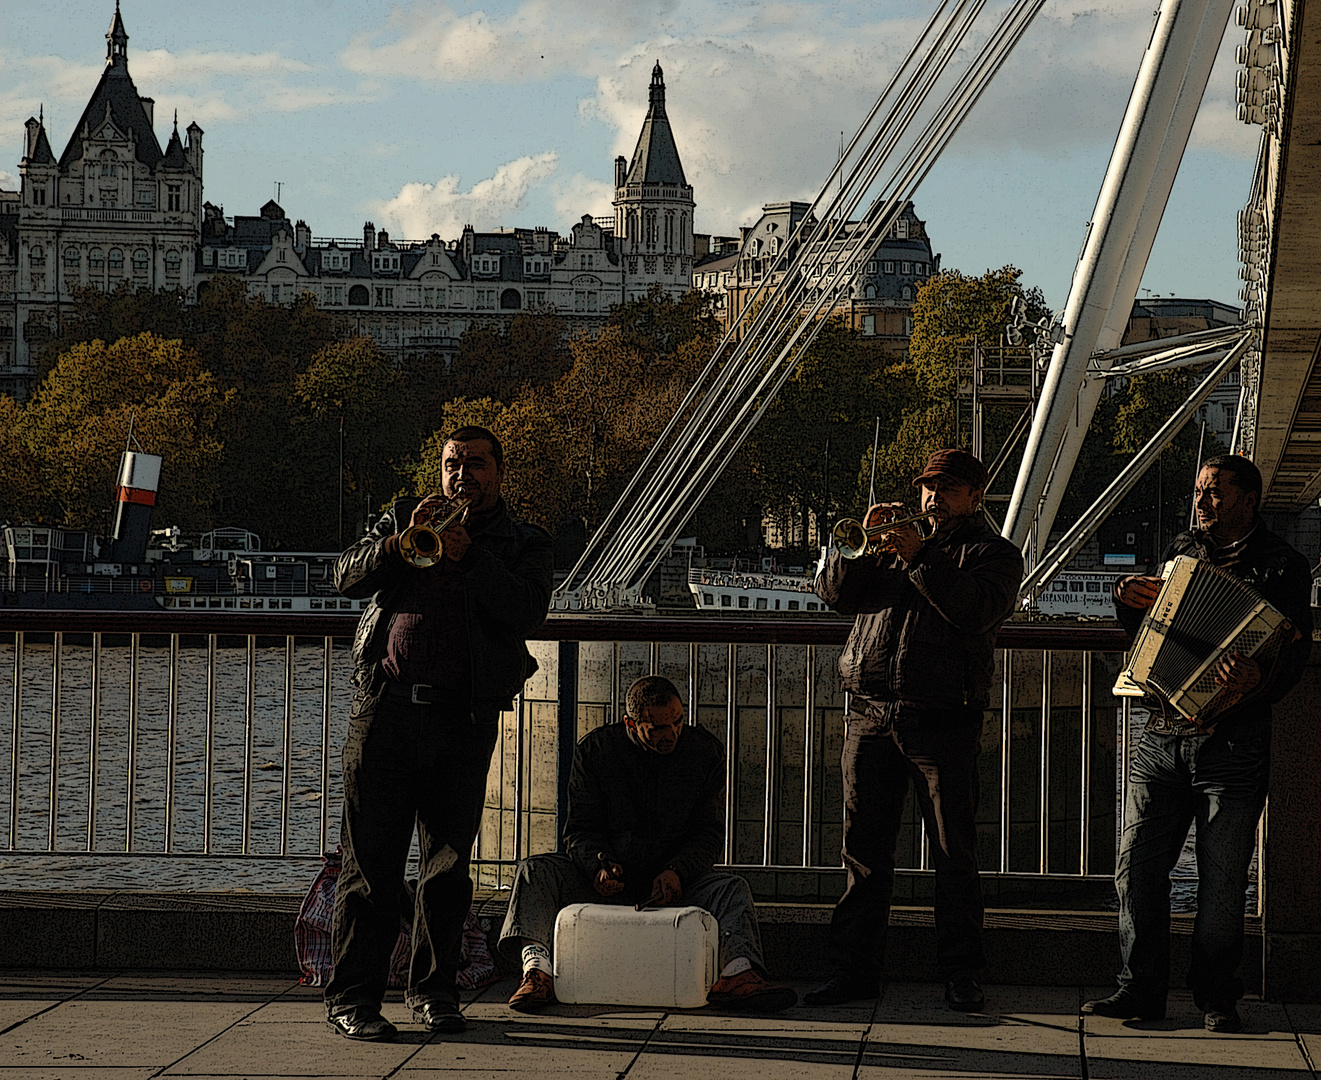 Streetband in London